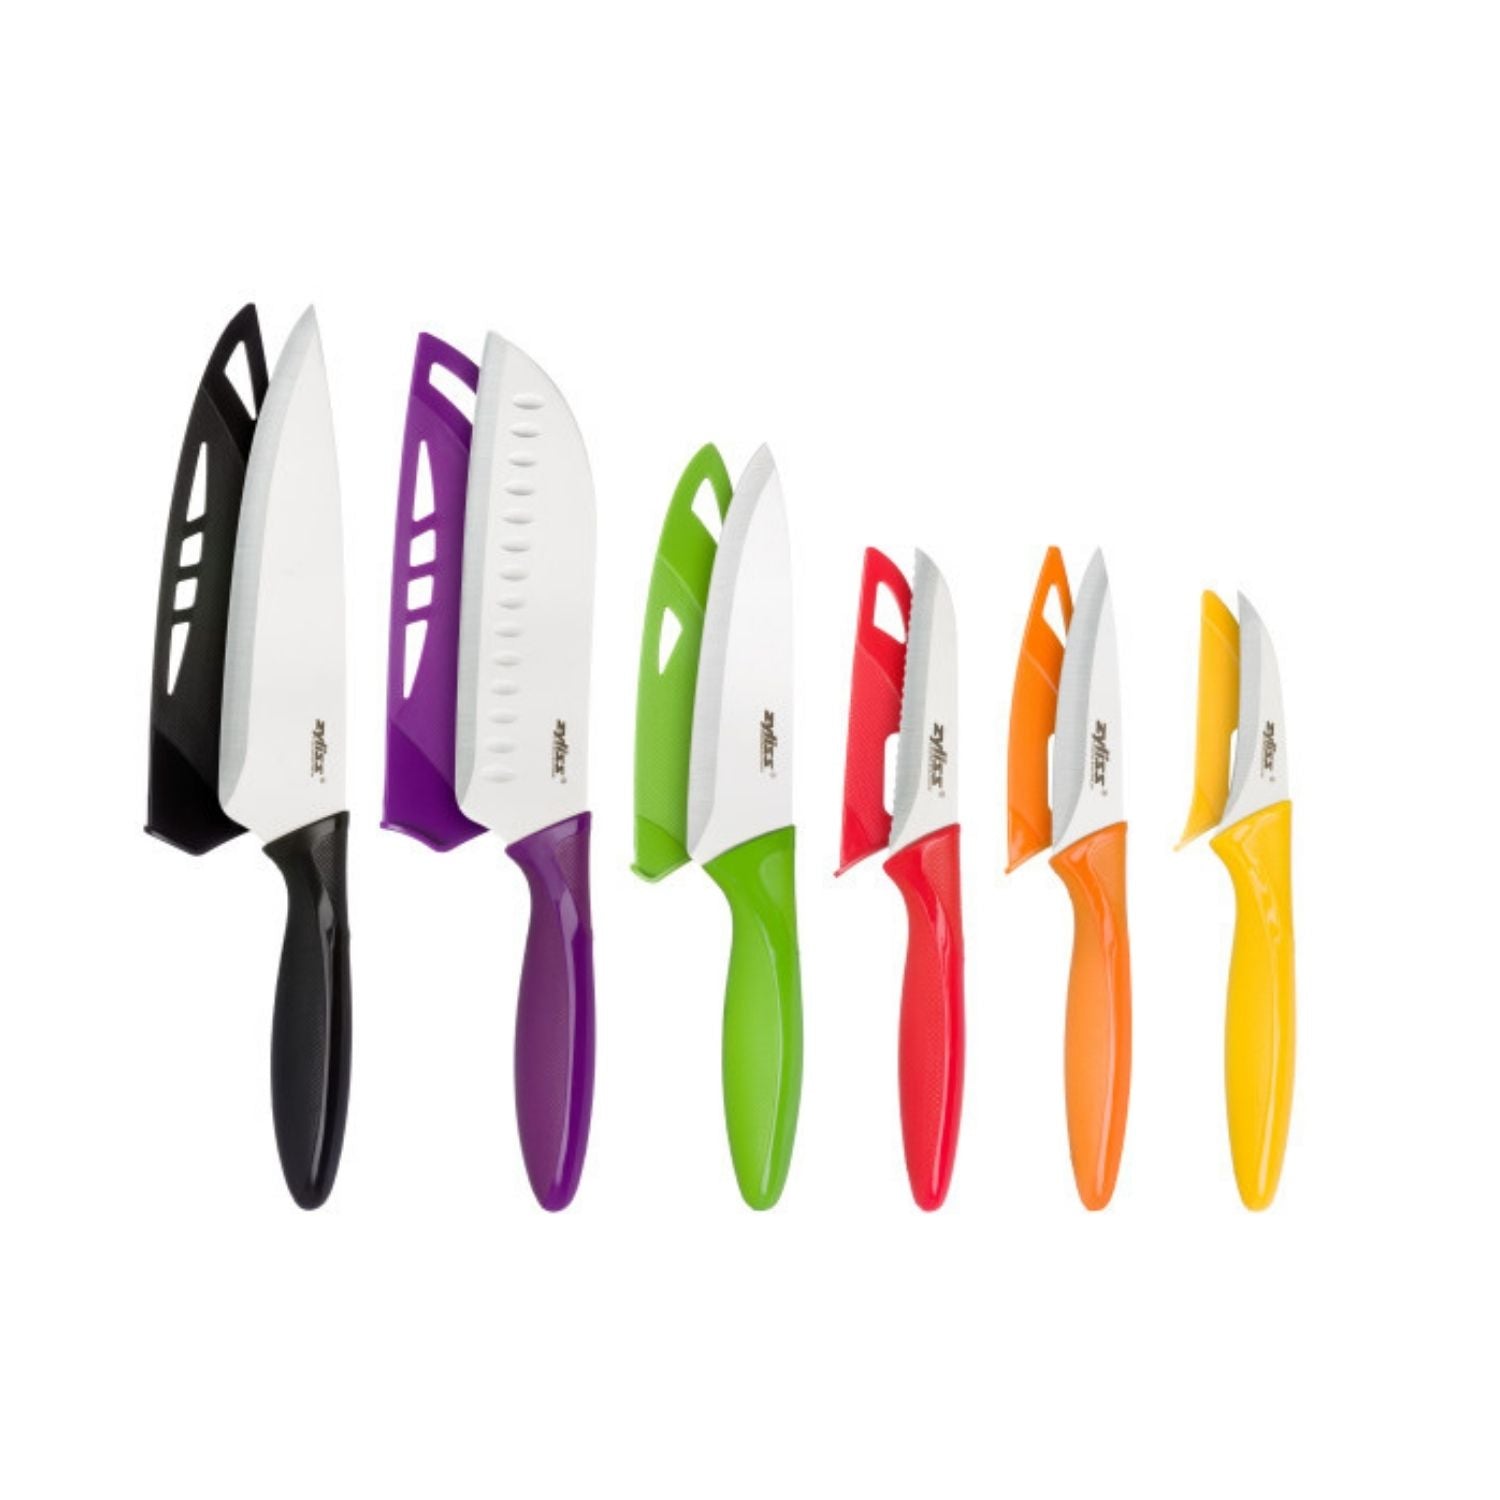 Zyliss 6 Piece Knife Set 1 Shaws Department Stores